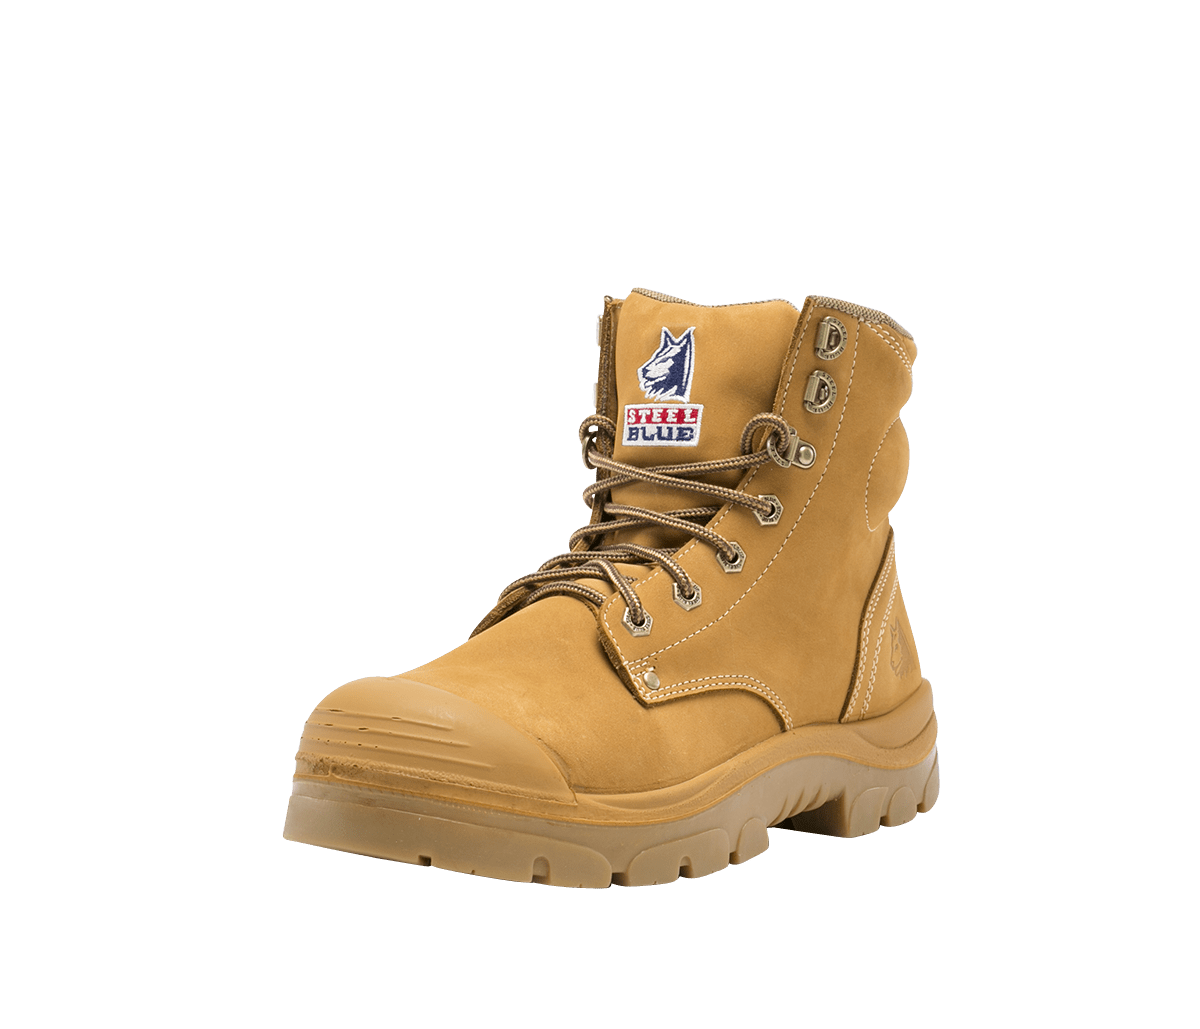 Steel Blue Argyle Lace Up Boot with Zip and Bump Cap - Wheat (332152)